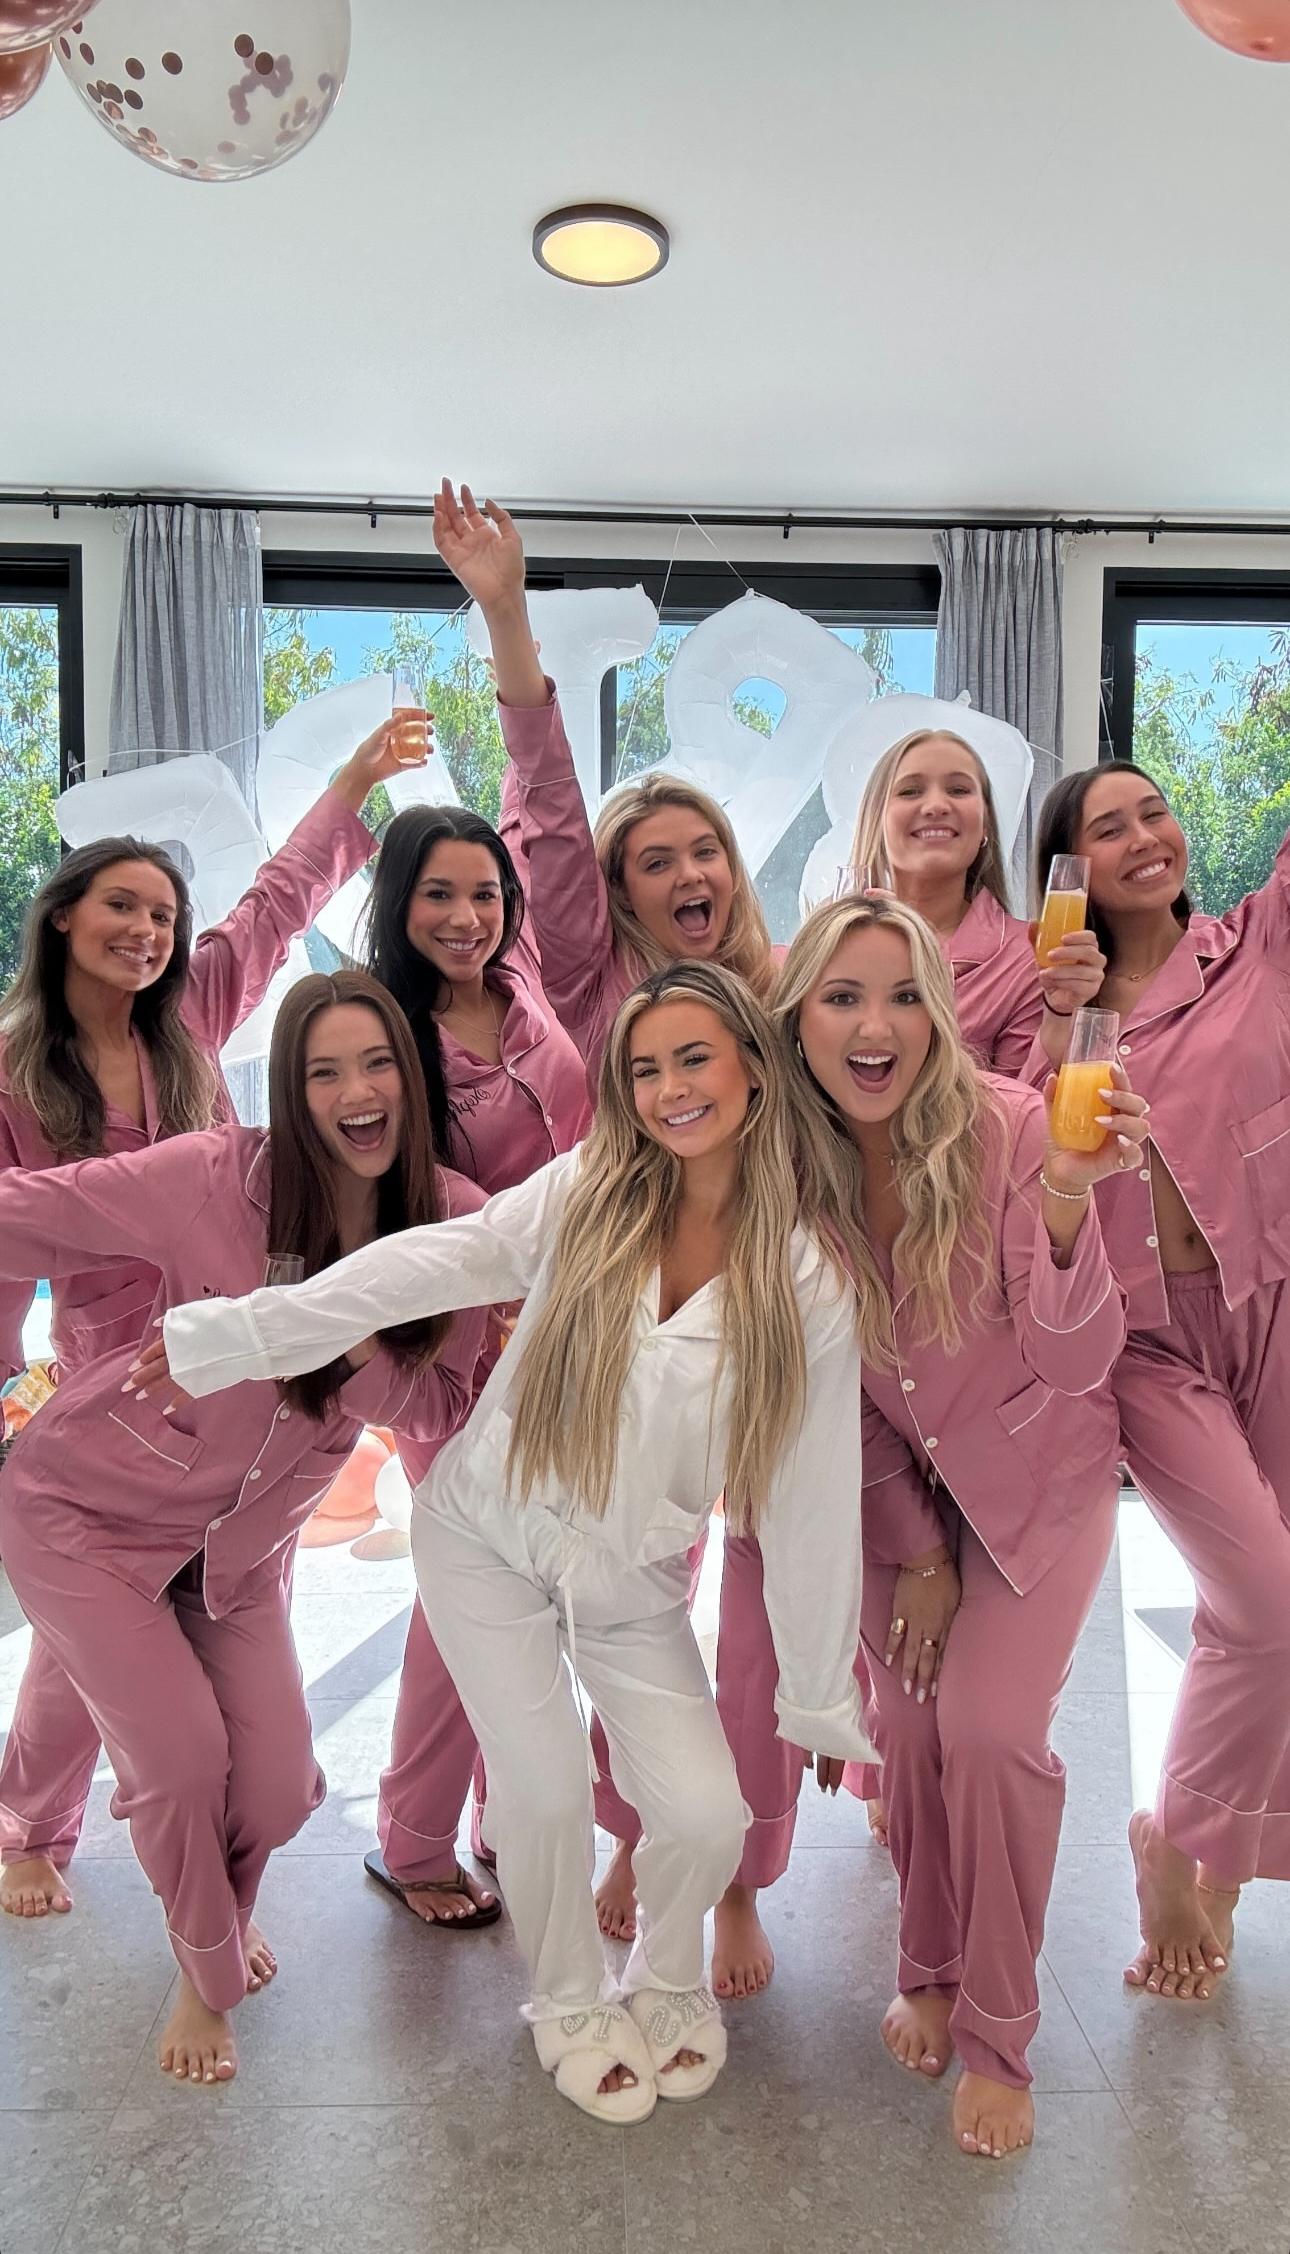 Emily Elizabeth in white pyjamas posing with her friends in pink pyjamas at her bridal party in the Turks and Caicos.